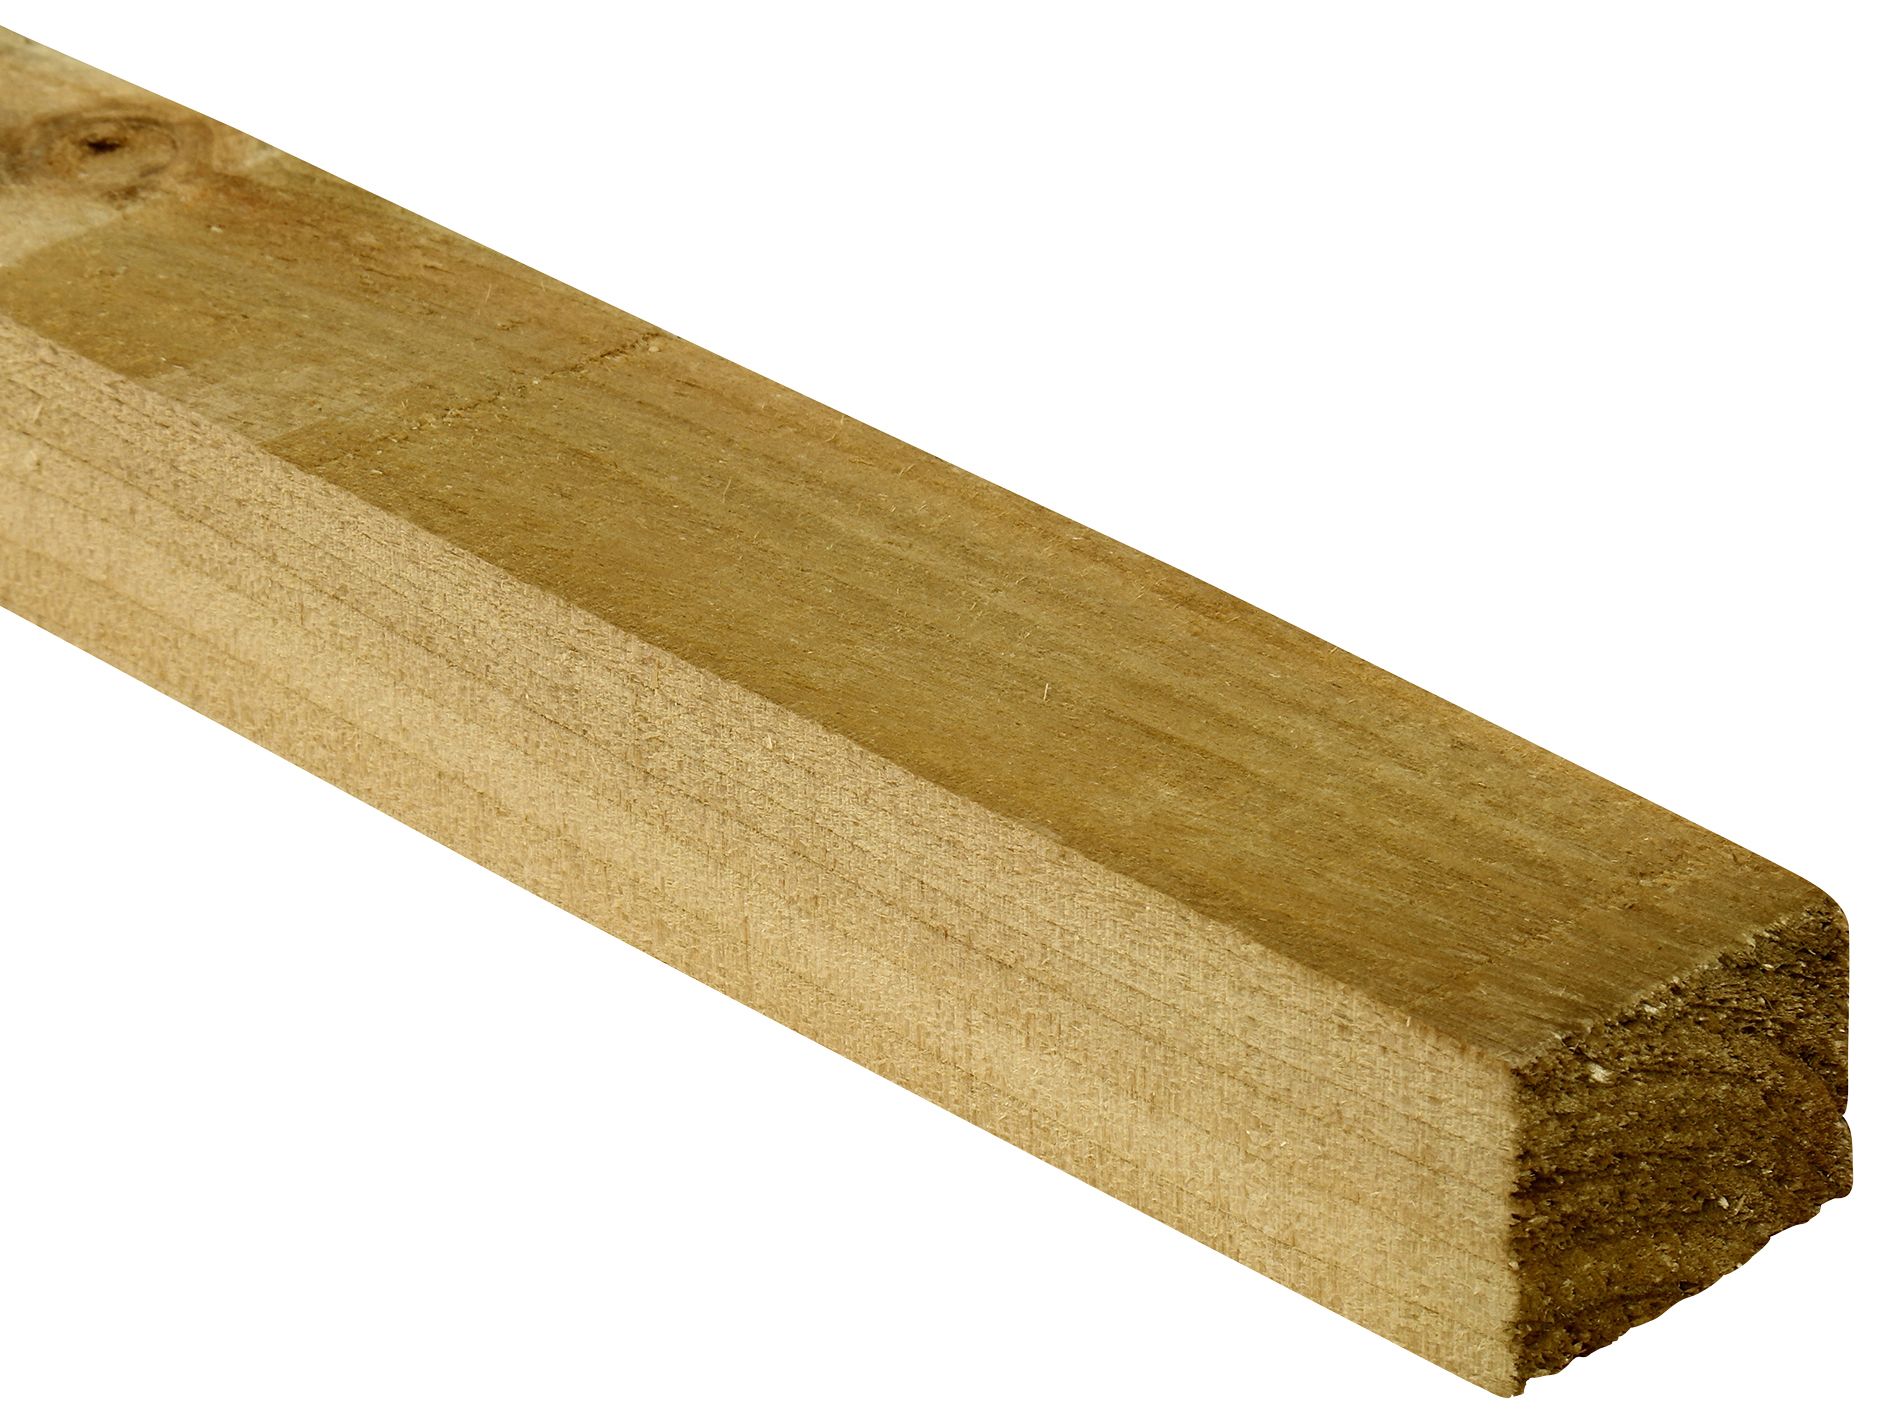 Image of Wickes Treated Sawn Timber - 47 x 47 x 1800mm